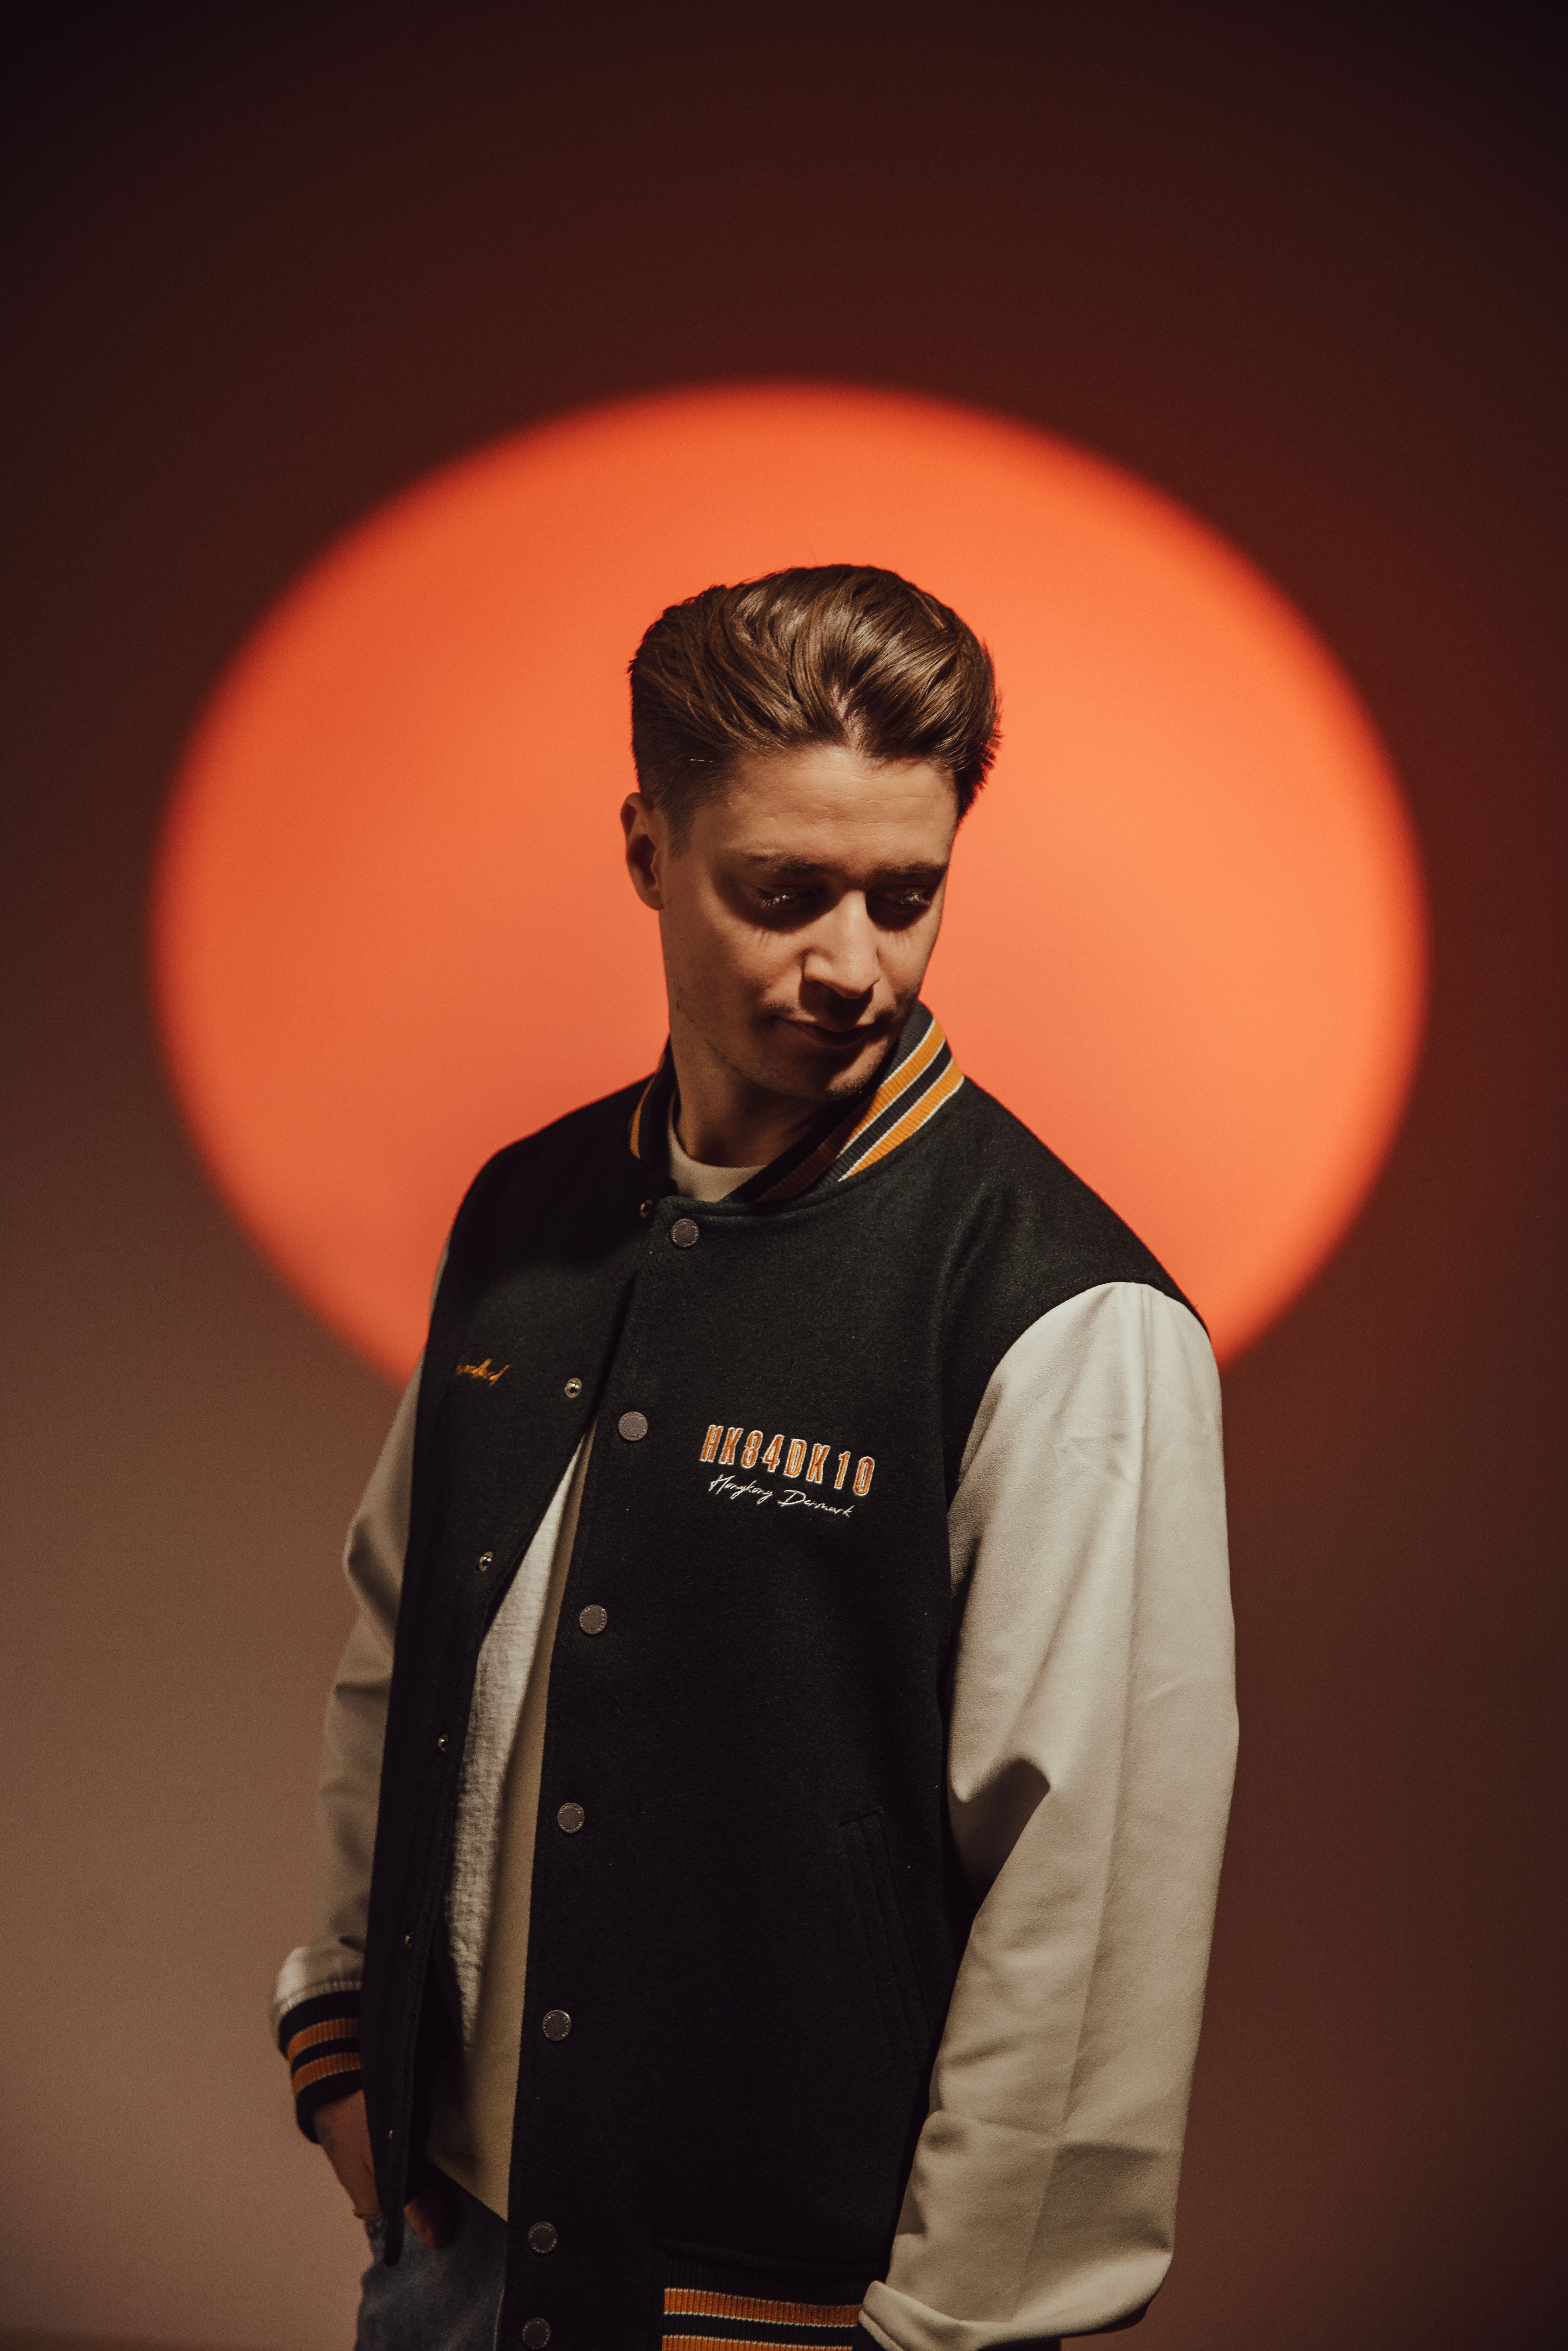 members only presale password for KYGO WORLD TOUR face value tickets in London at The O2